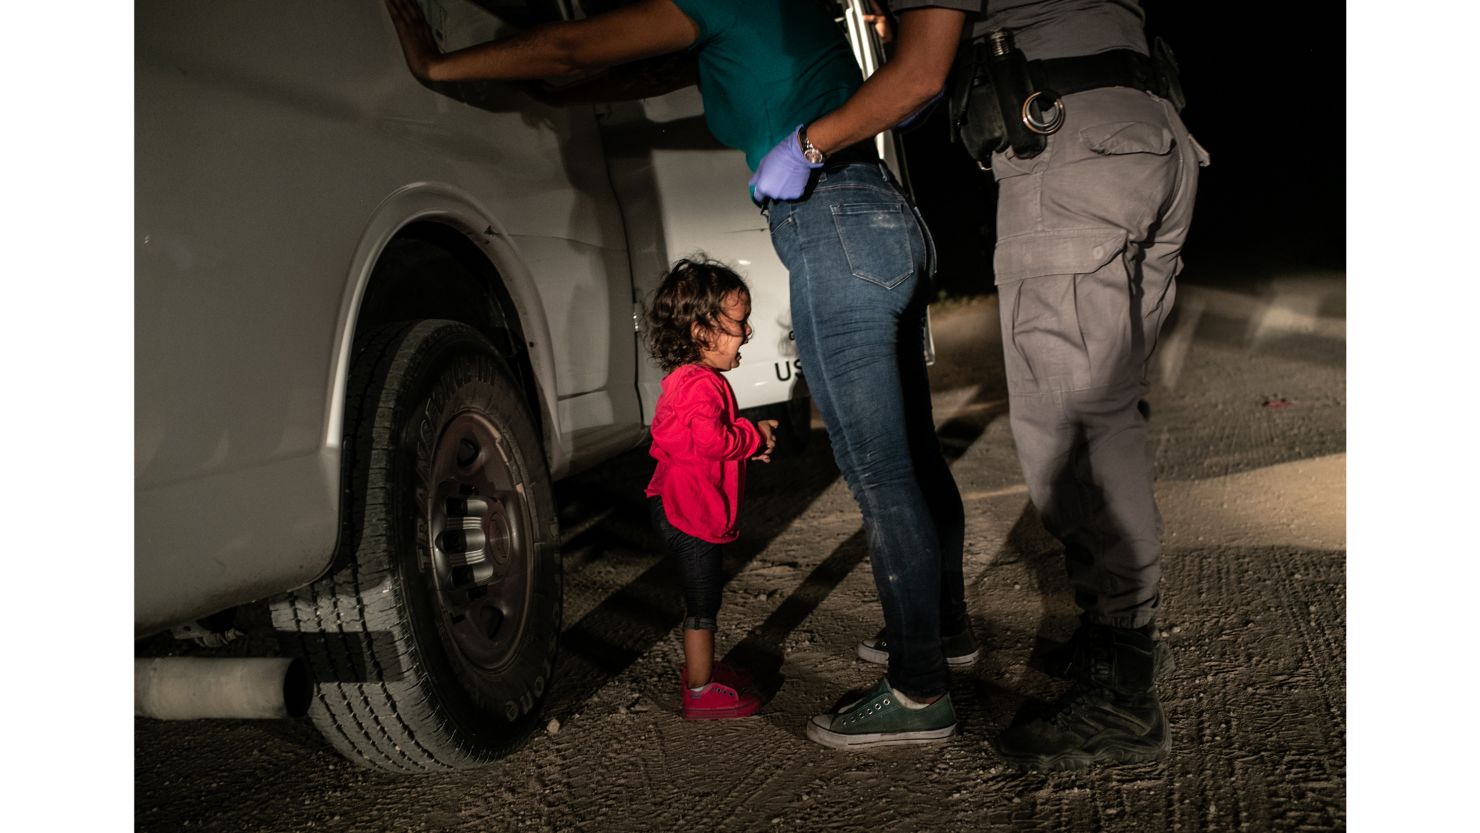 A 2-year-old Honduran girl cries as her mother is searched near the US-Mexico border on June 12. This photo won a World Press Photo prize on Thursday.